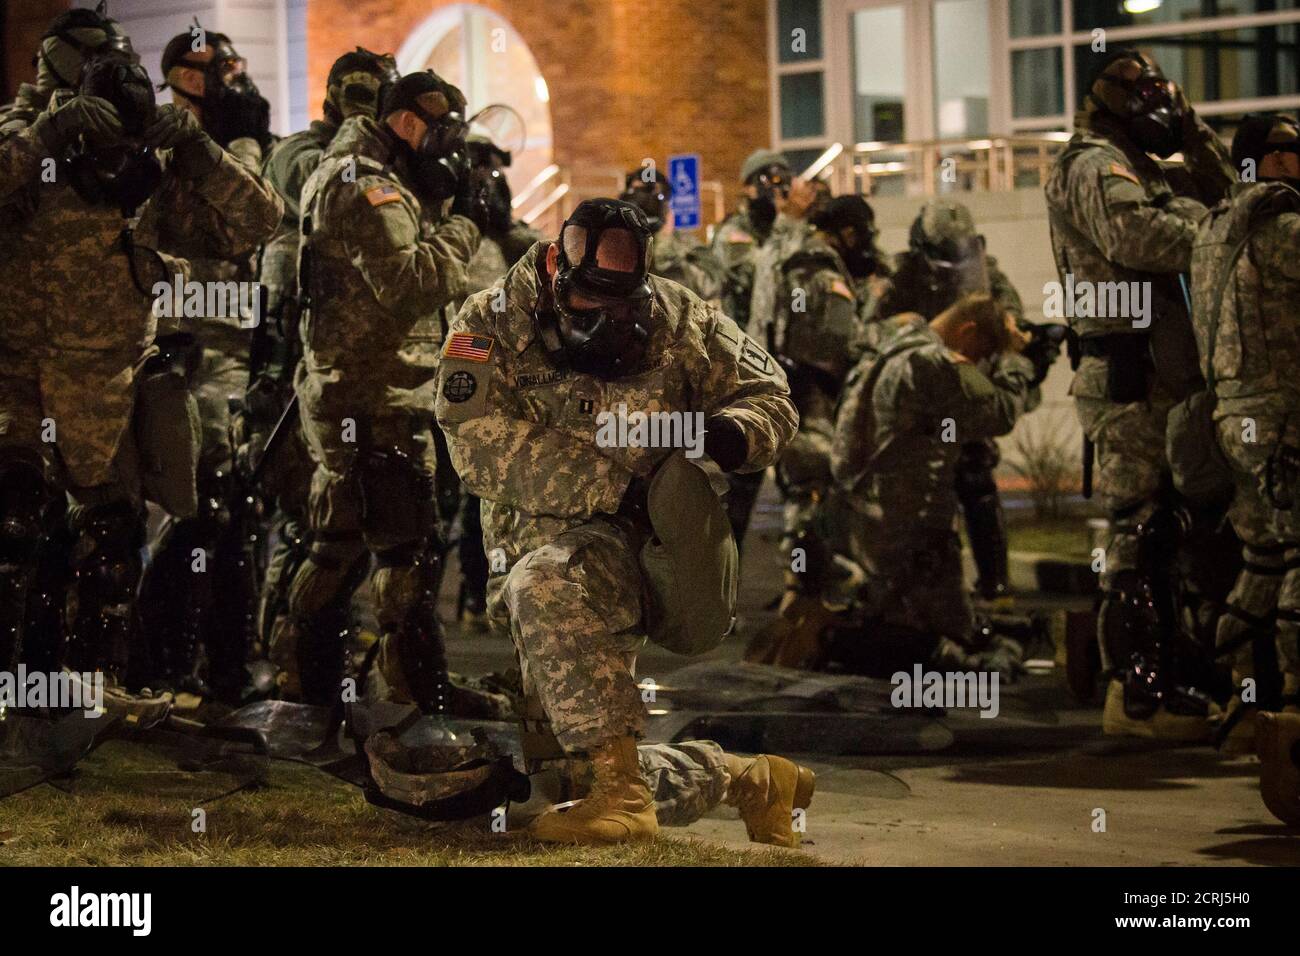 Members of the National Guard wear their gas masks during a protest outside  the Ferguson Police Station in Missouri, November 26, 2014. More than 2,000  National Guard troops spread out across the